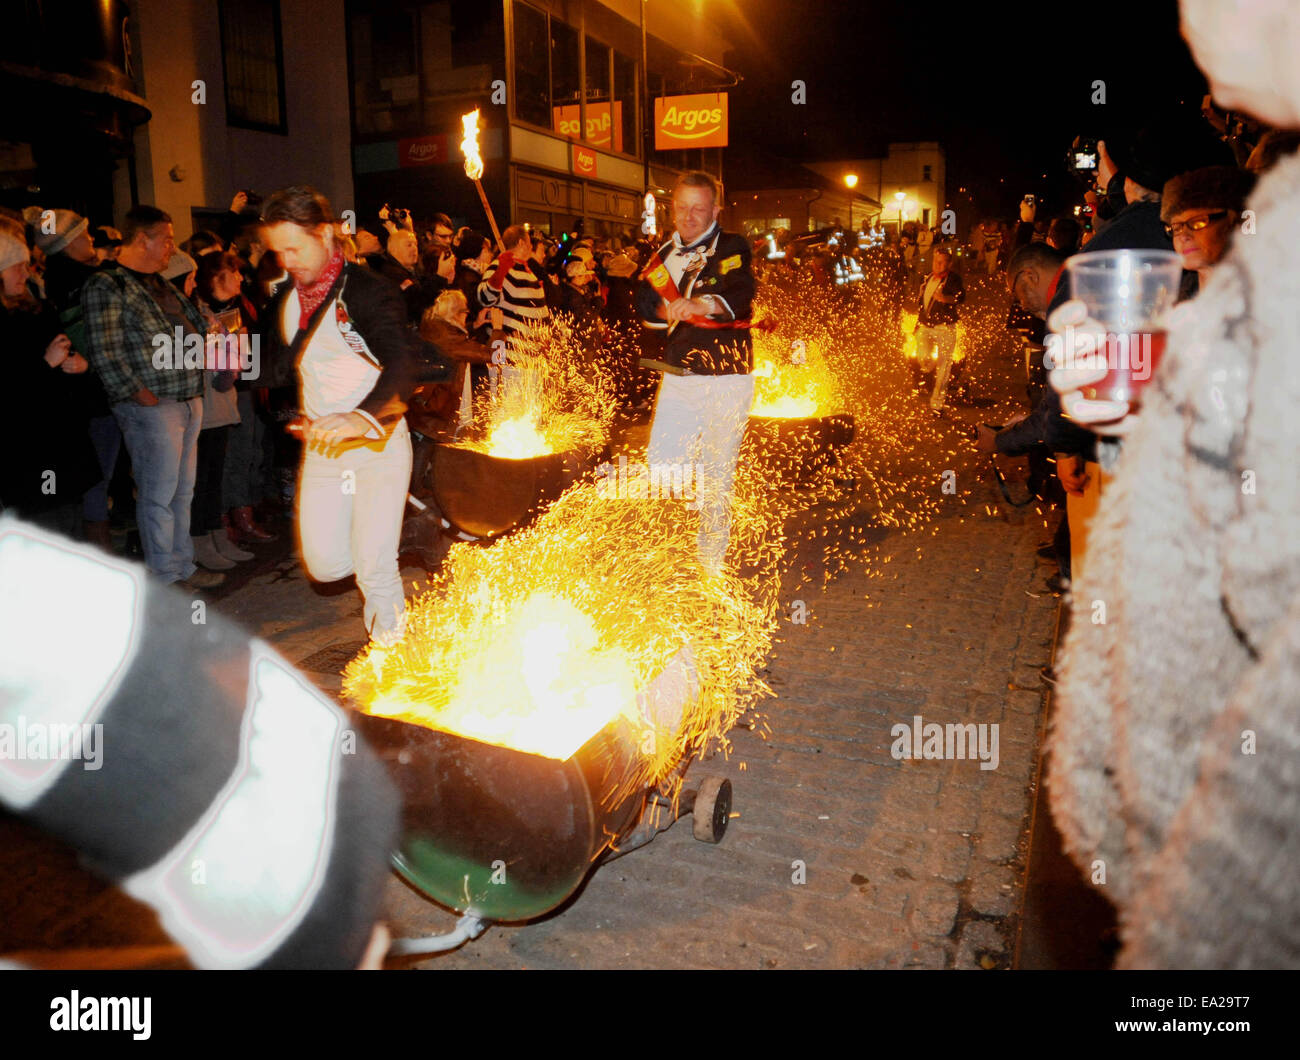 Lewes, Sussex, UK. 5th November, 2014. The mens flaming tar barrel race takes place at the annual Lewes Bonfire Celebrations Stock Photo